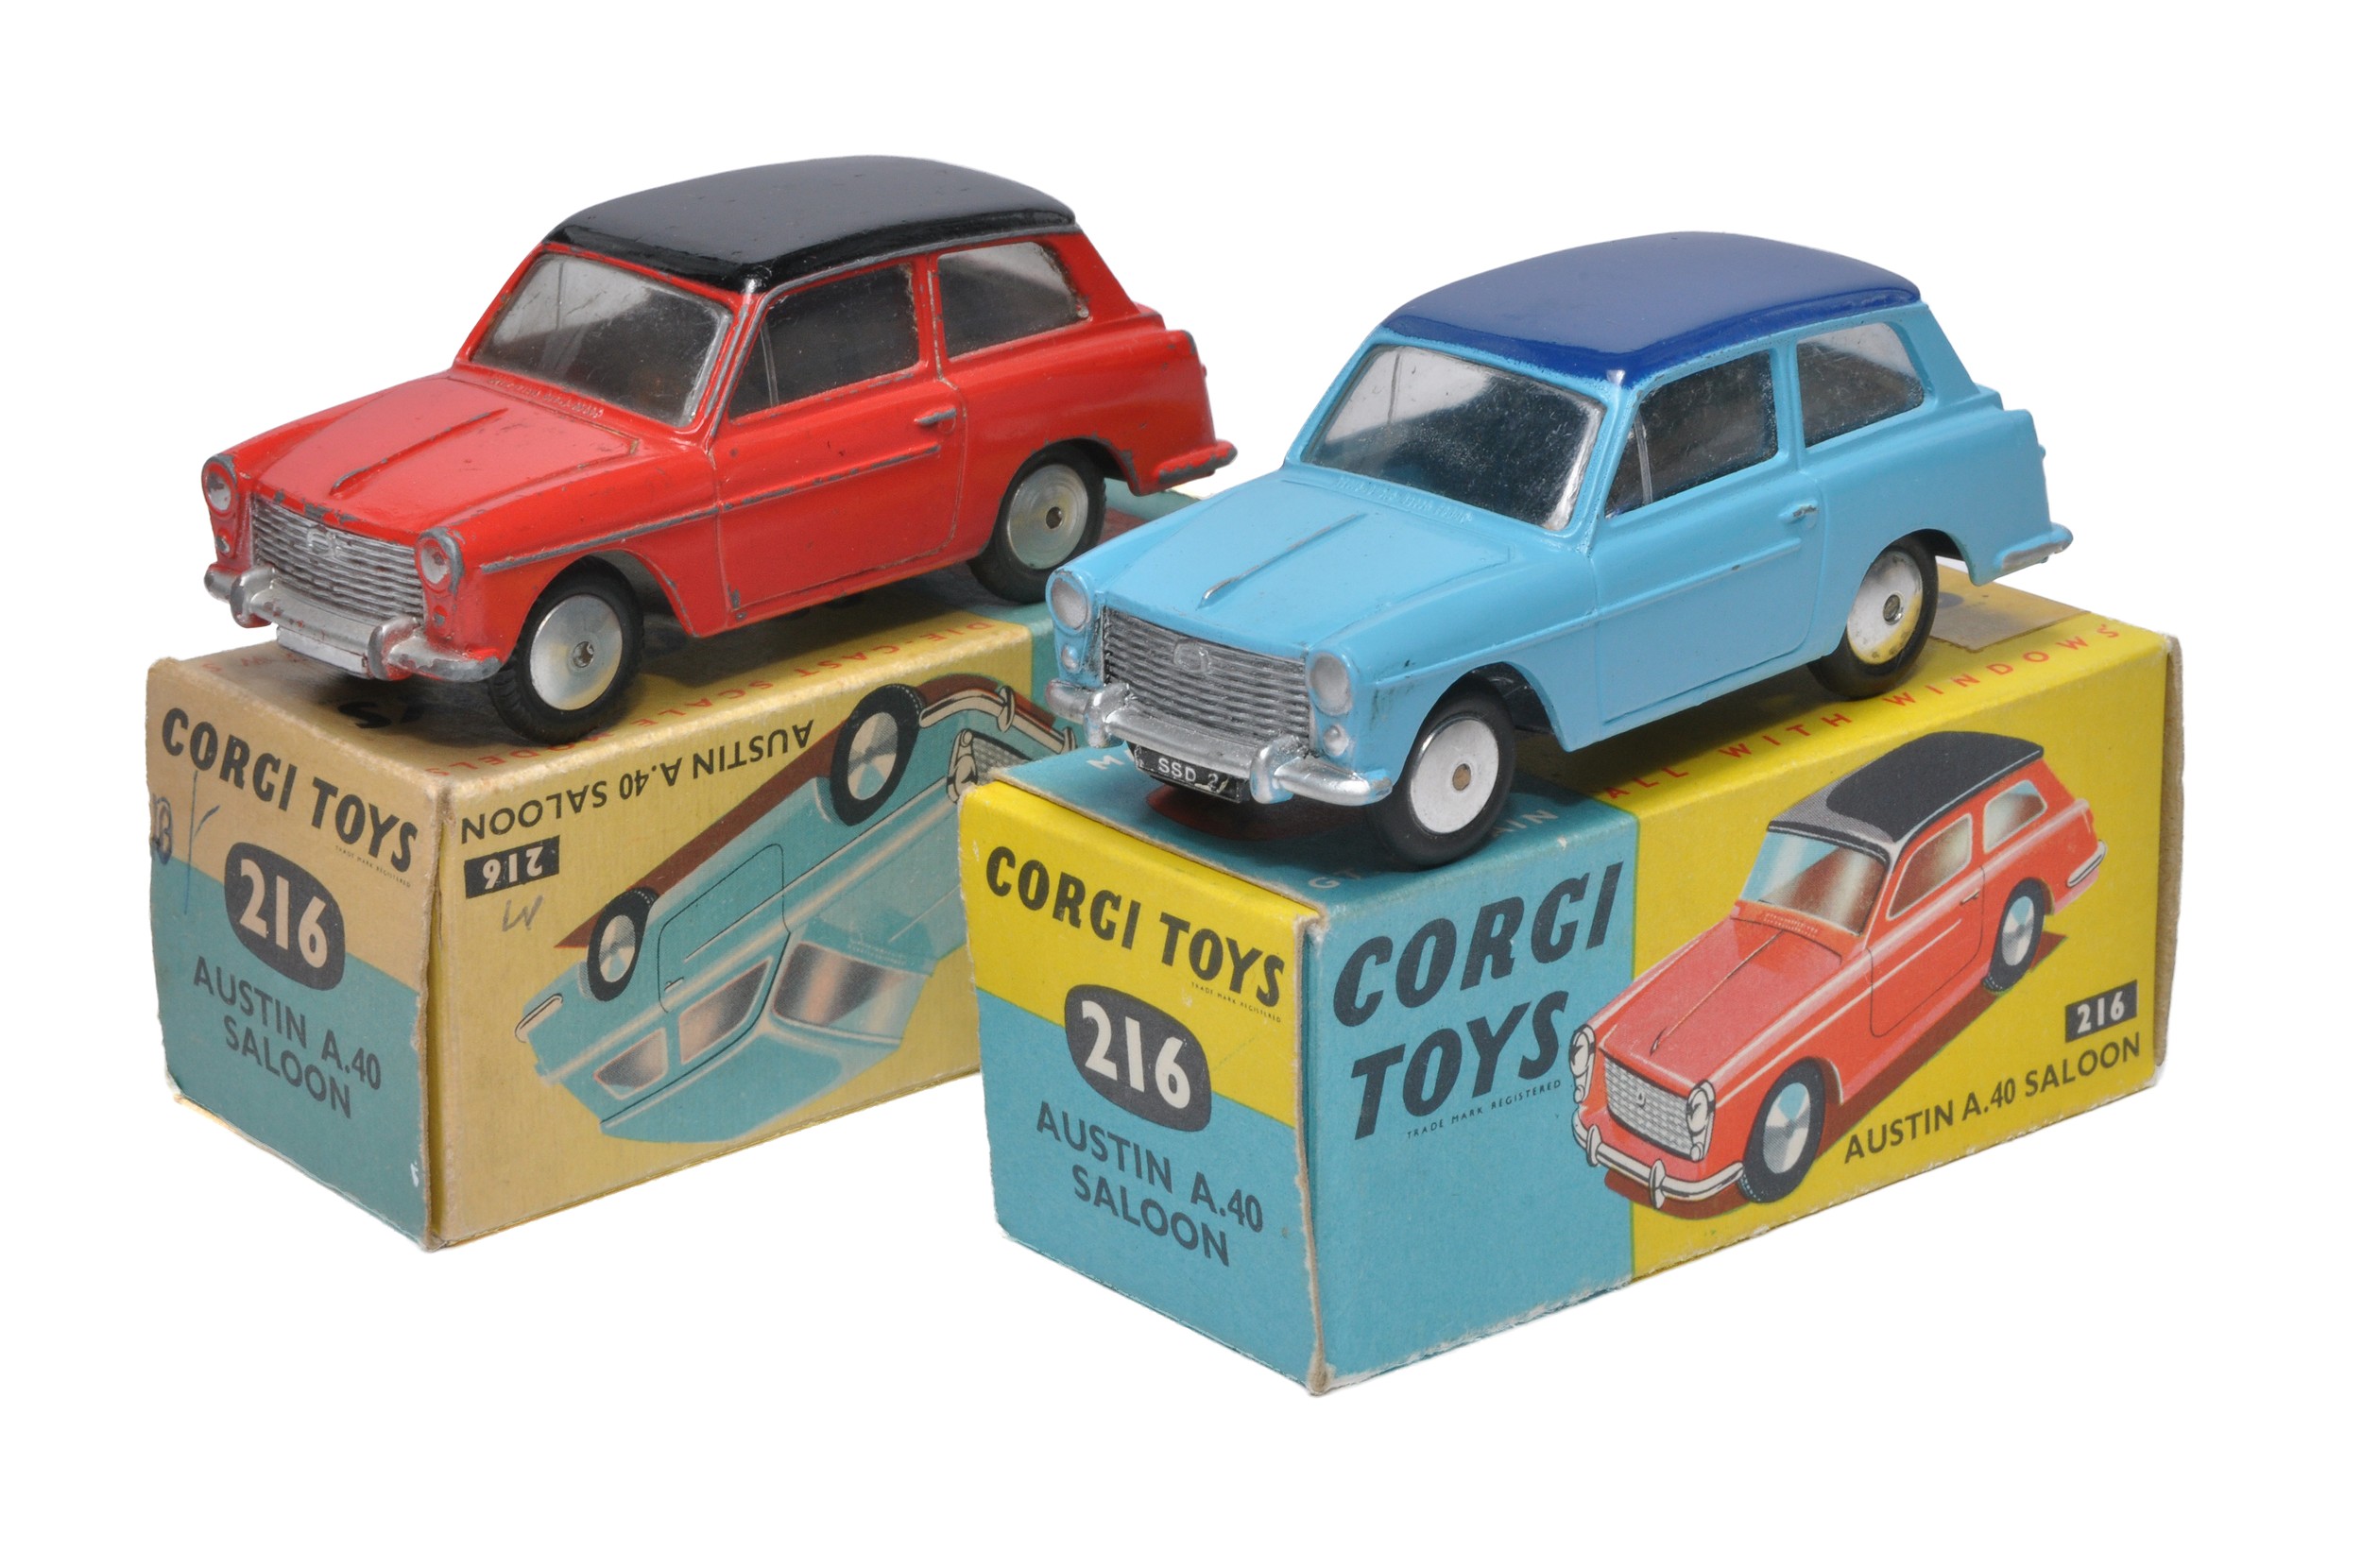 Corgi duo of No. 216 Austin A40 Saloon (Colour variations, red issue mechanical as shown). Both